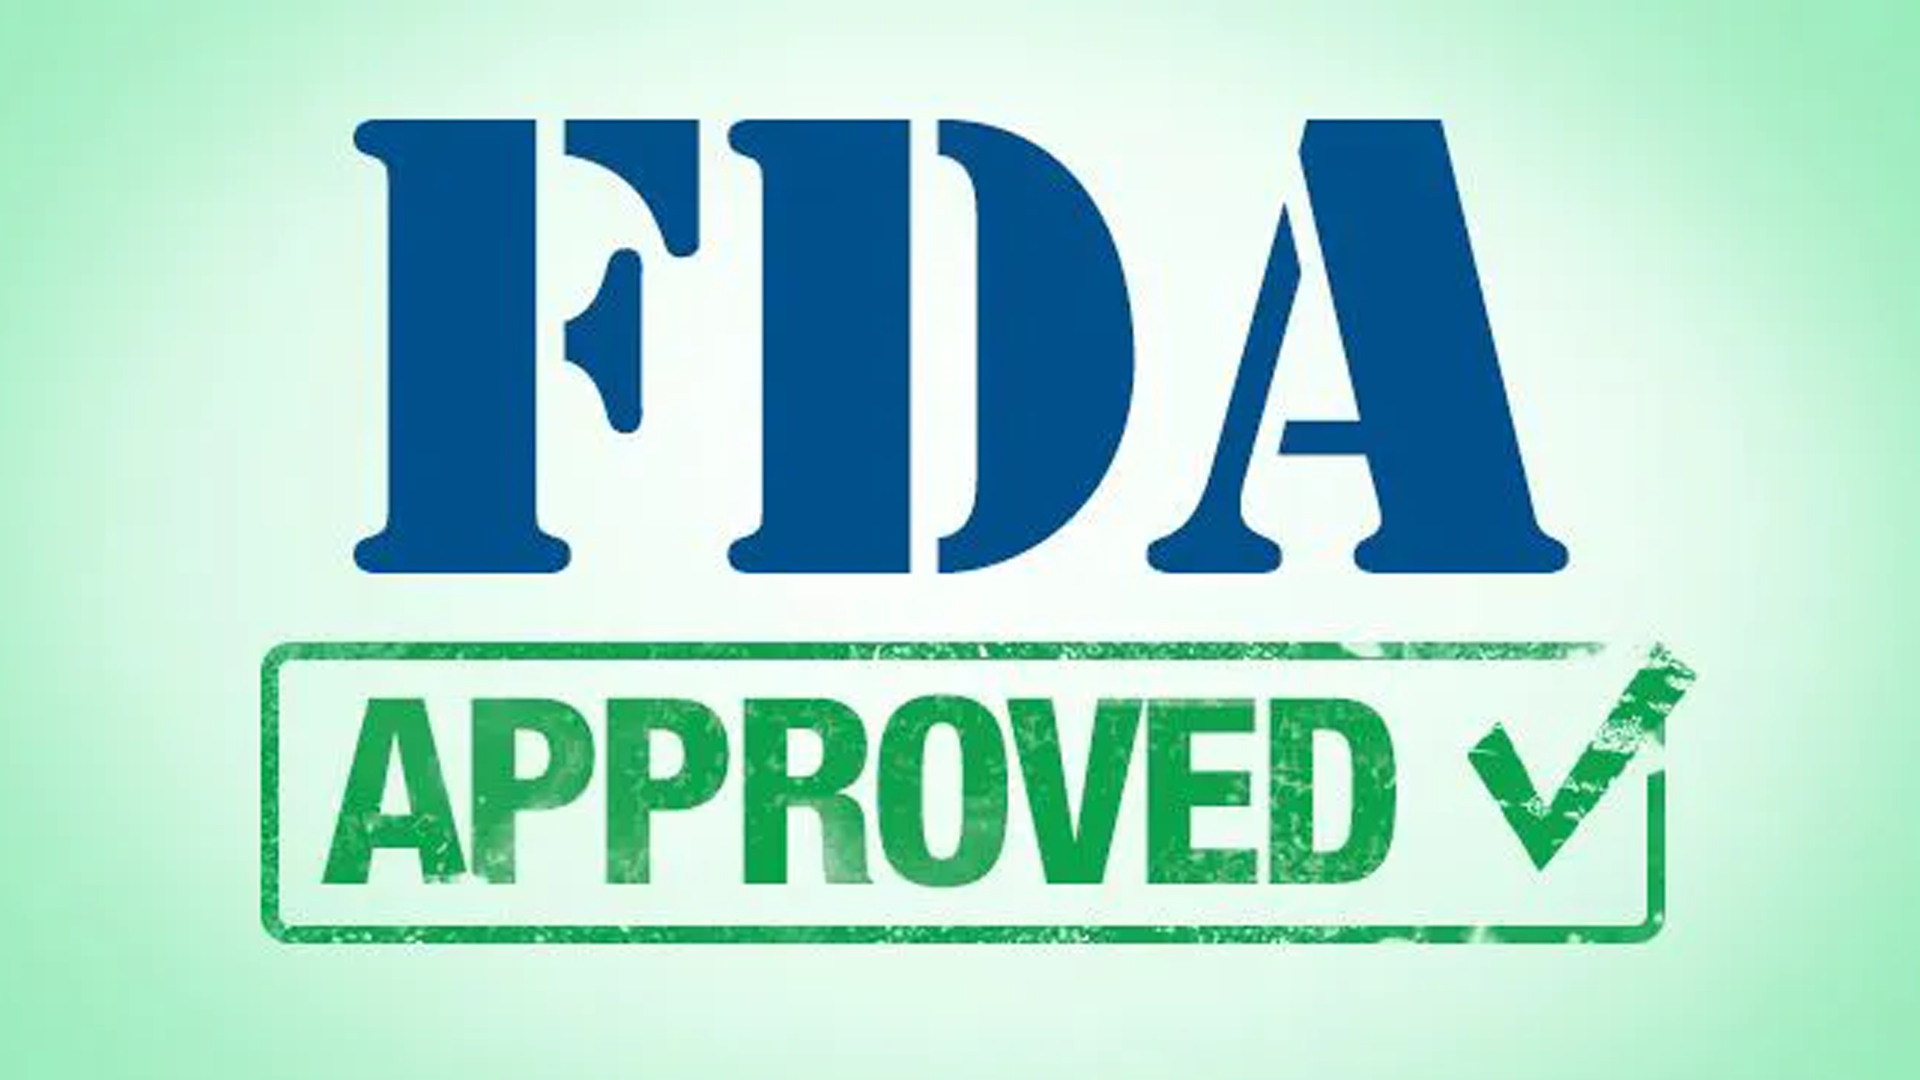 Bi-weekly Teclistamab Dosing Receives FDA Approval for Relapsed/Refractory Multiple Myeloma